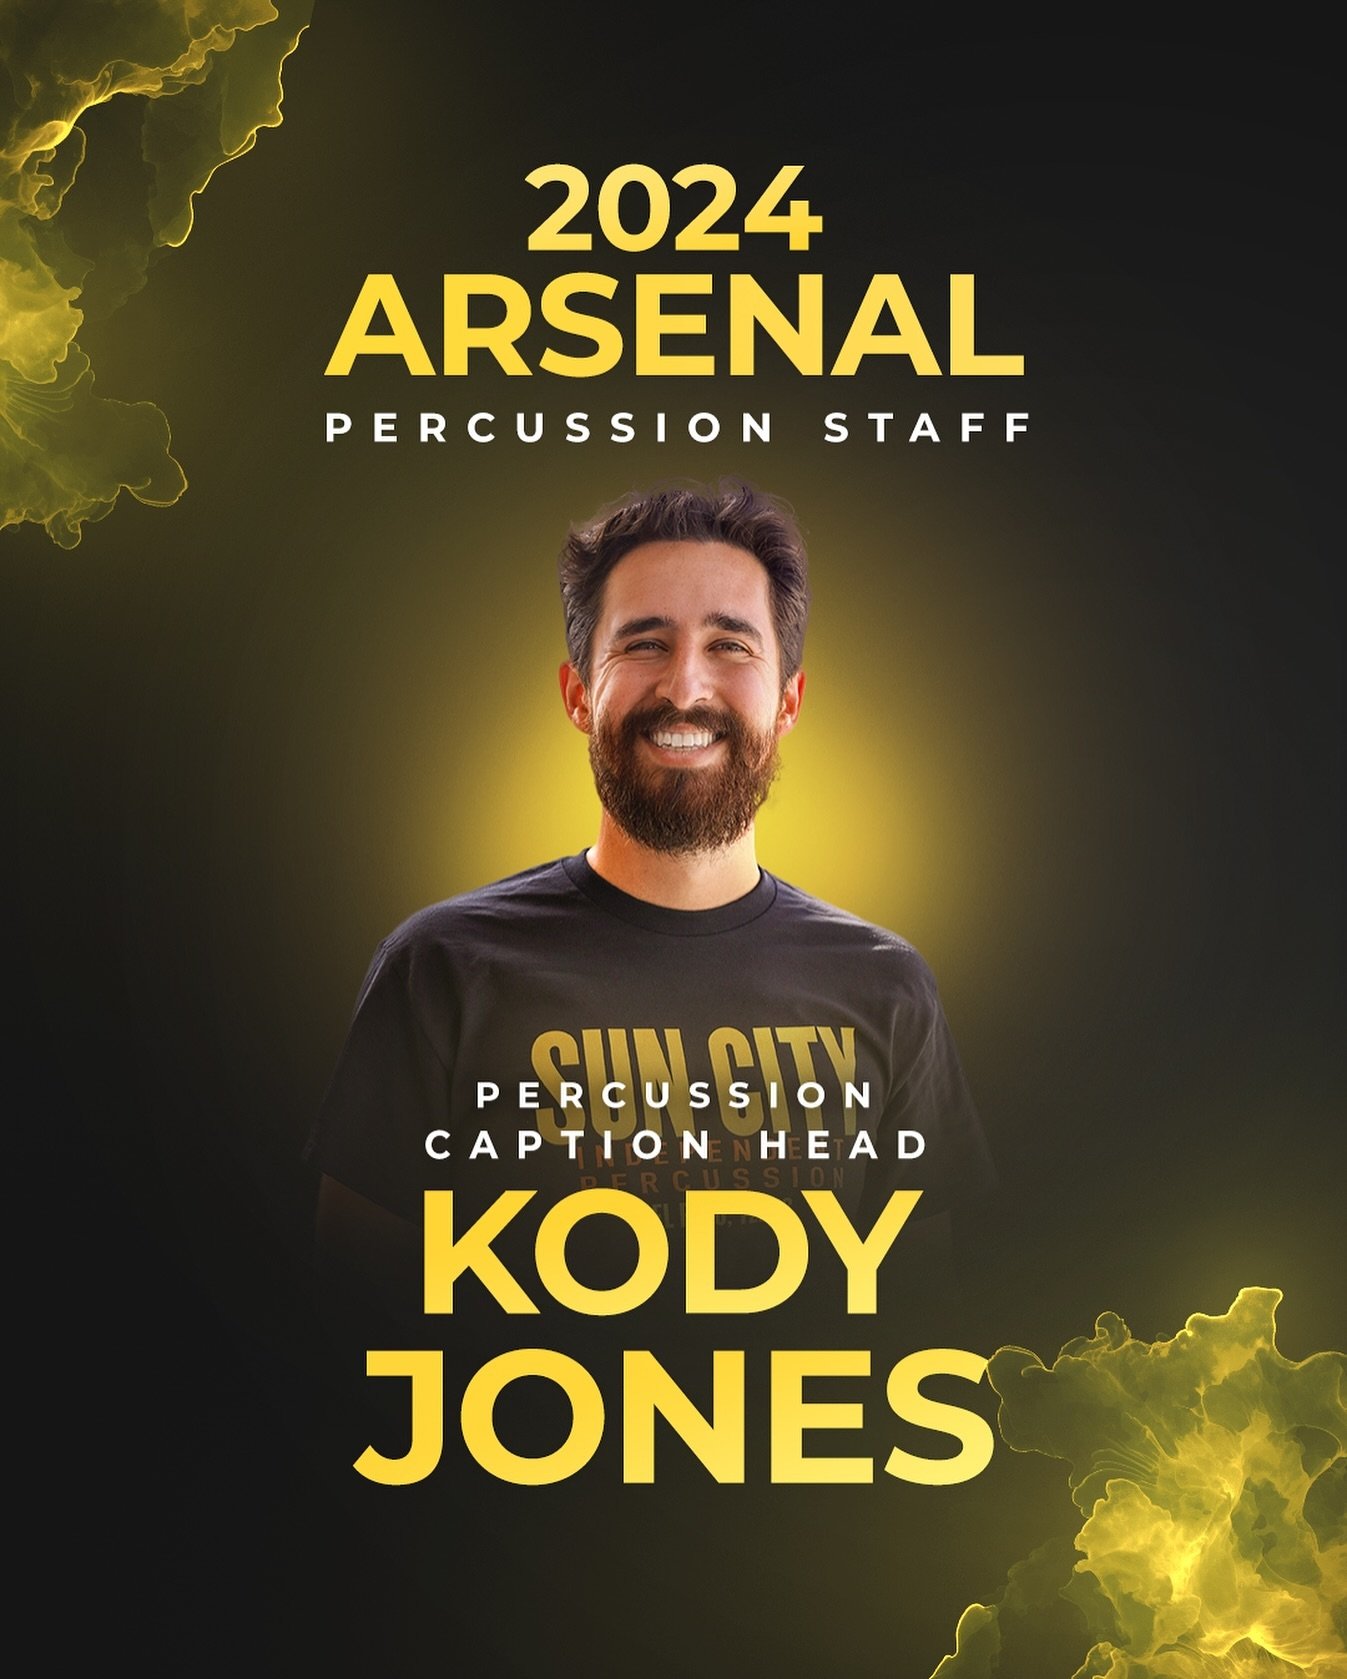 Presenting our 2024 Arsenal Percussion Caption Head, Kody Jones!

Kody Wayne Jones is currently the Percussion Teaching Assistant at the University of Texas at El Paso where he runs the drum line under the direction of Dr. Andrew P. Smith. At UTEP, h